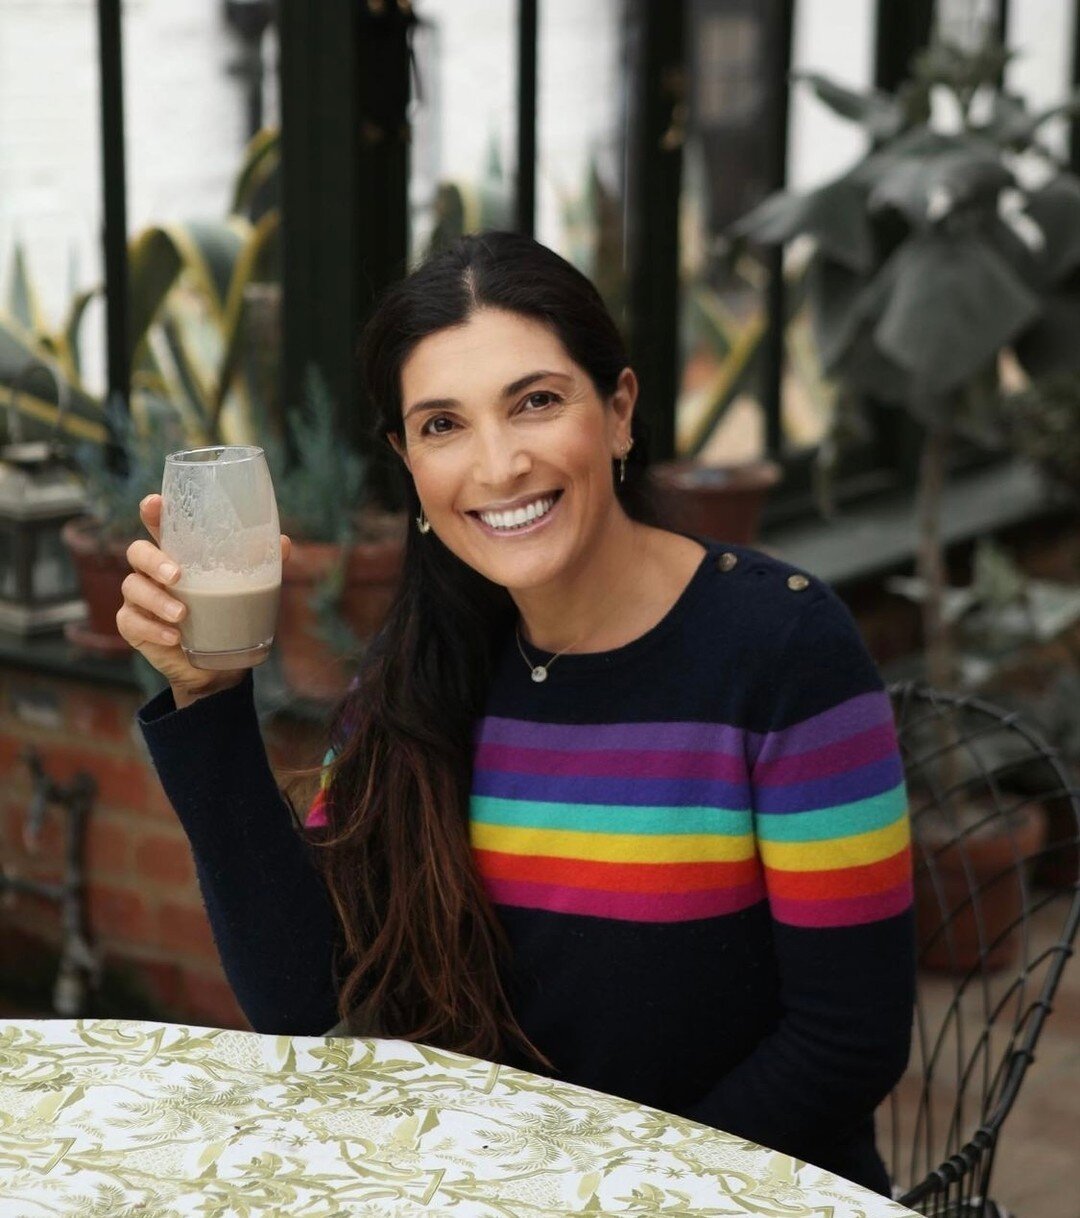 A great way to start the week with Tara. Rainbows and healthy smoothies 😊⁠
Nutrition. ⁠
Yoga. ⁠
Health &amp; Happiness! ⁠
Merci Tara for all your useful tips. ⁠
⁠
Follow the link in bio to read our wonderful interview with Tara in full or check the 